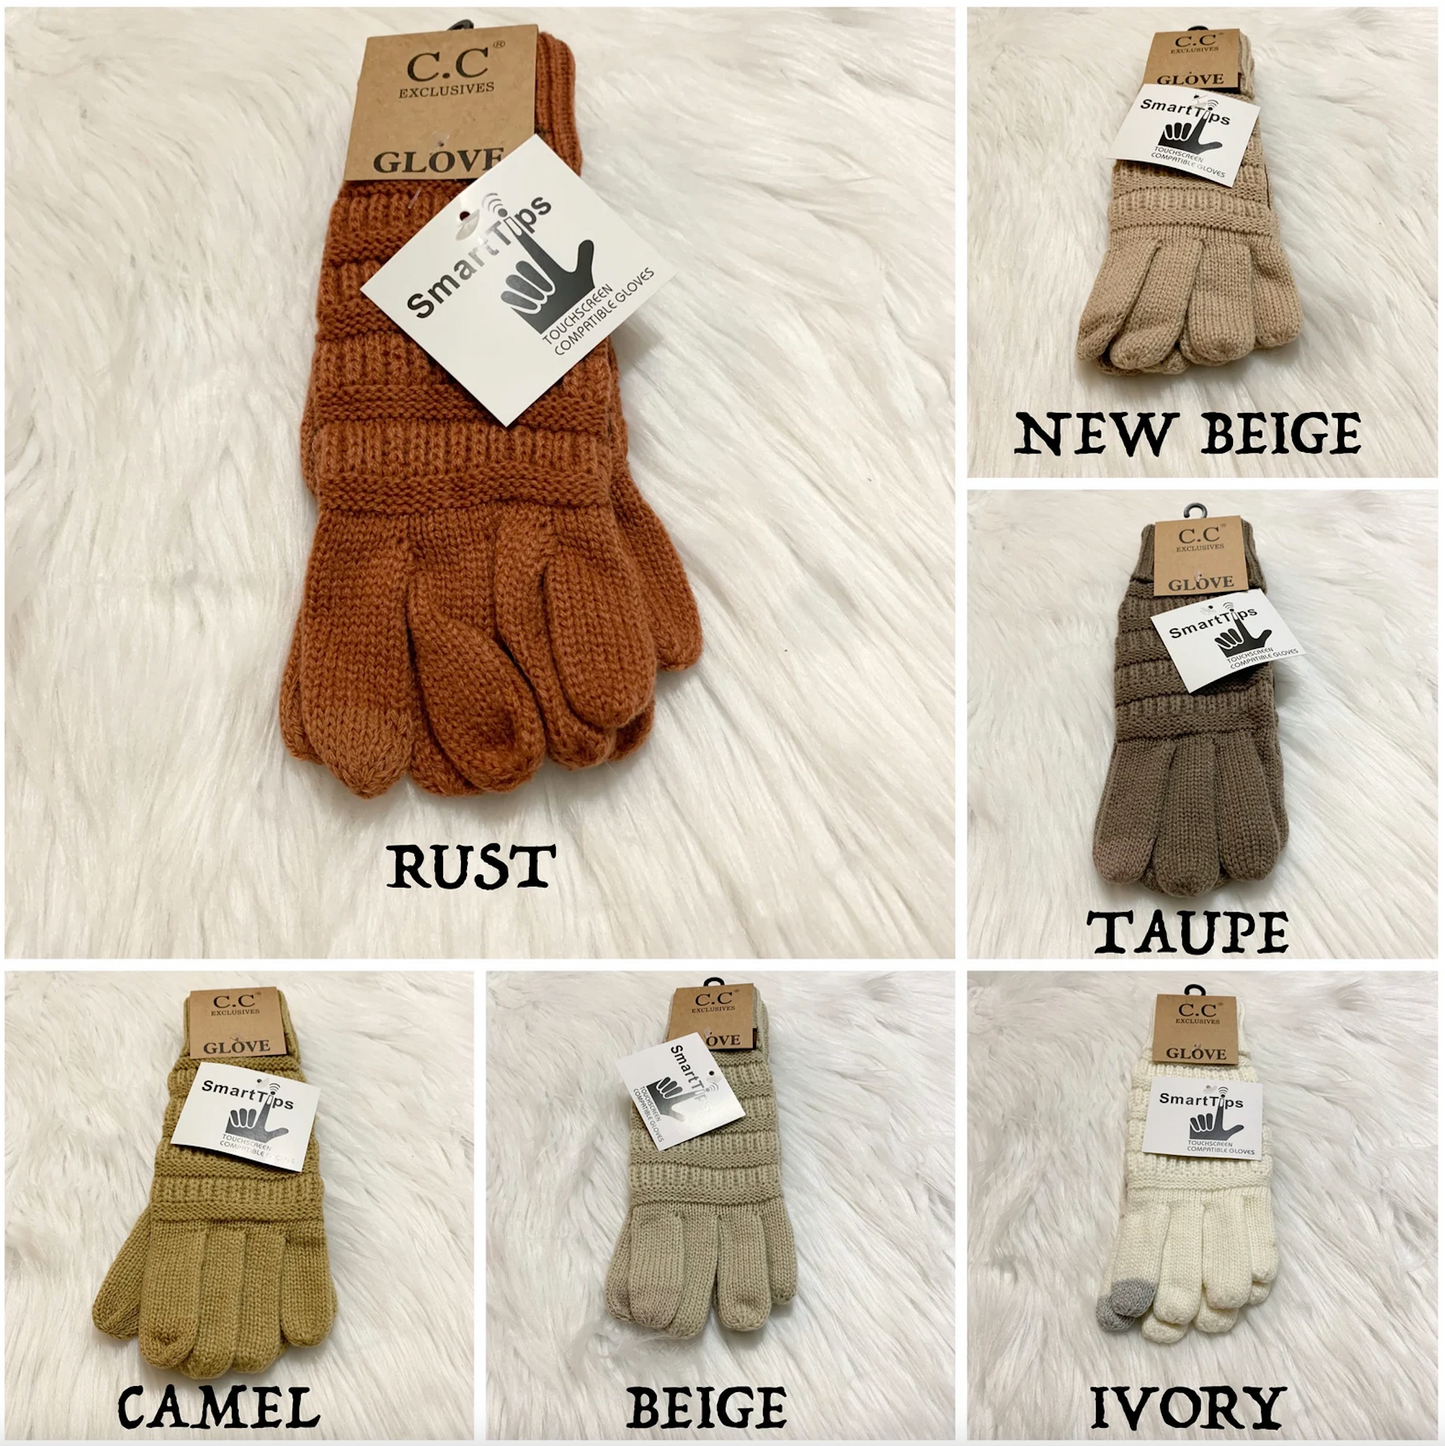 C.C Classic Smart Tip Gloves (Adults), Knit Gloves, Winter Gloves, Premium Gloves, Warm Gloves, Colorful Gloves, Holiday Gift, Birthday Gift